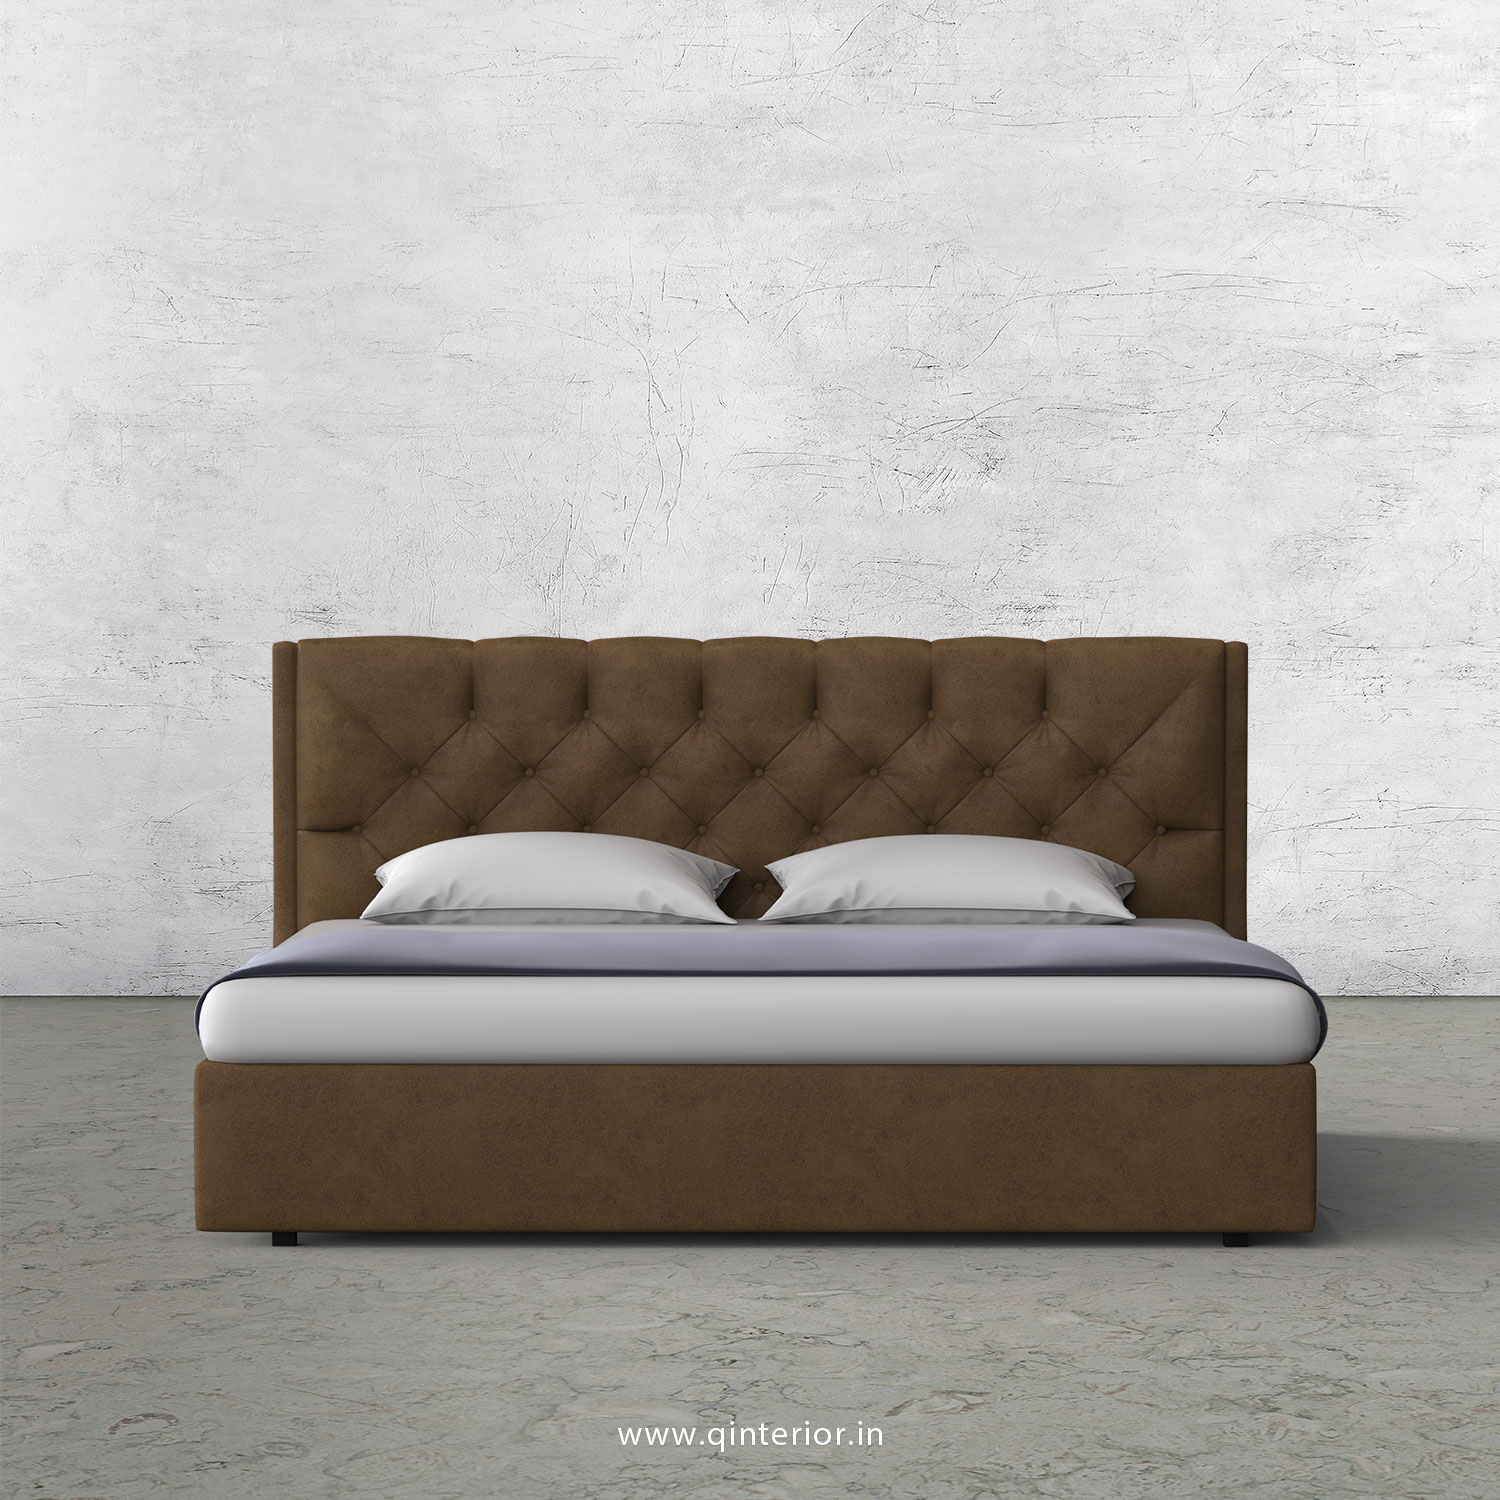 Scorpius Queen Bed in Fab Leather Fabric - QBD009 FL02